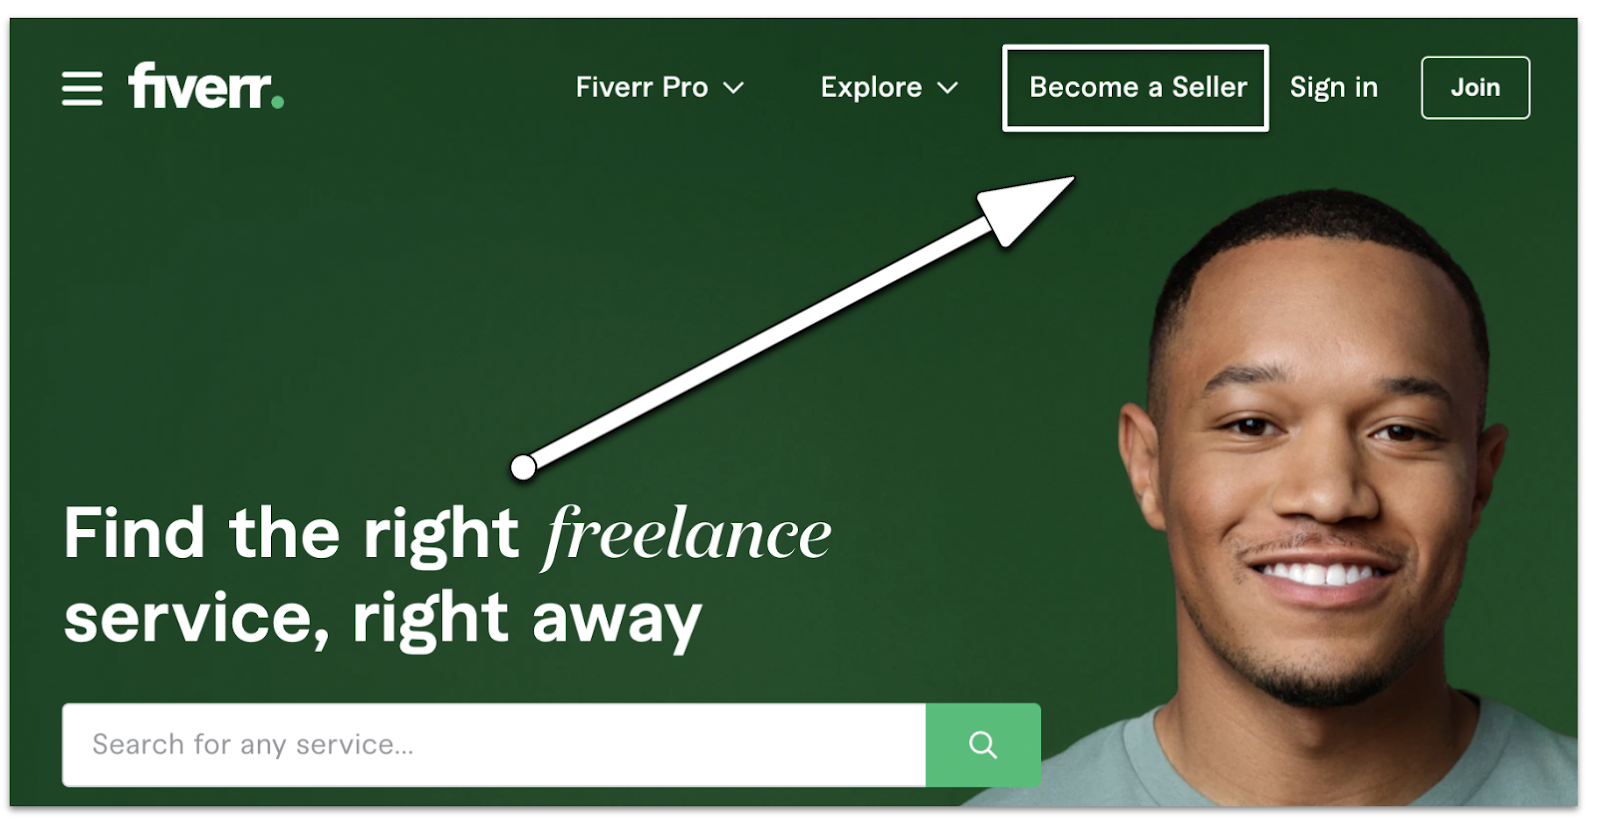 Fiverr's "Become a Seller" button